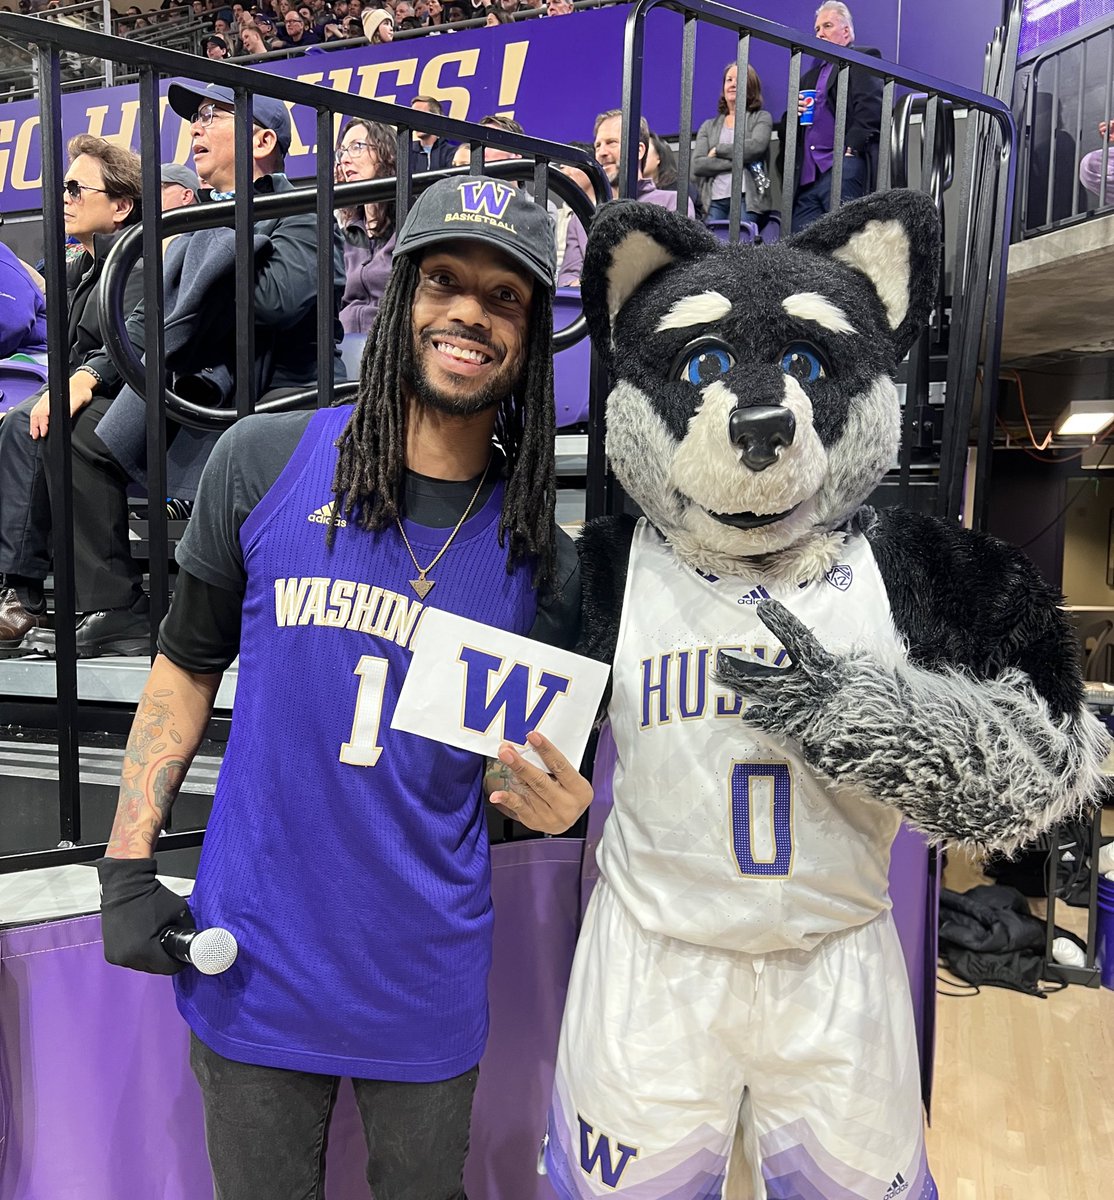 Another game bringing the entertainment and energy with my dawg @HarryTheHusky